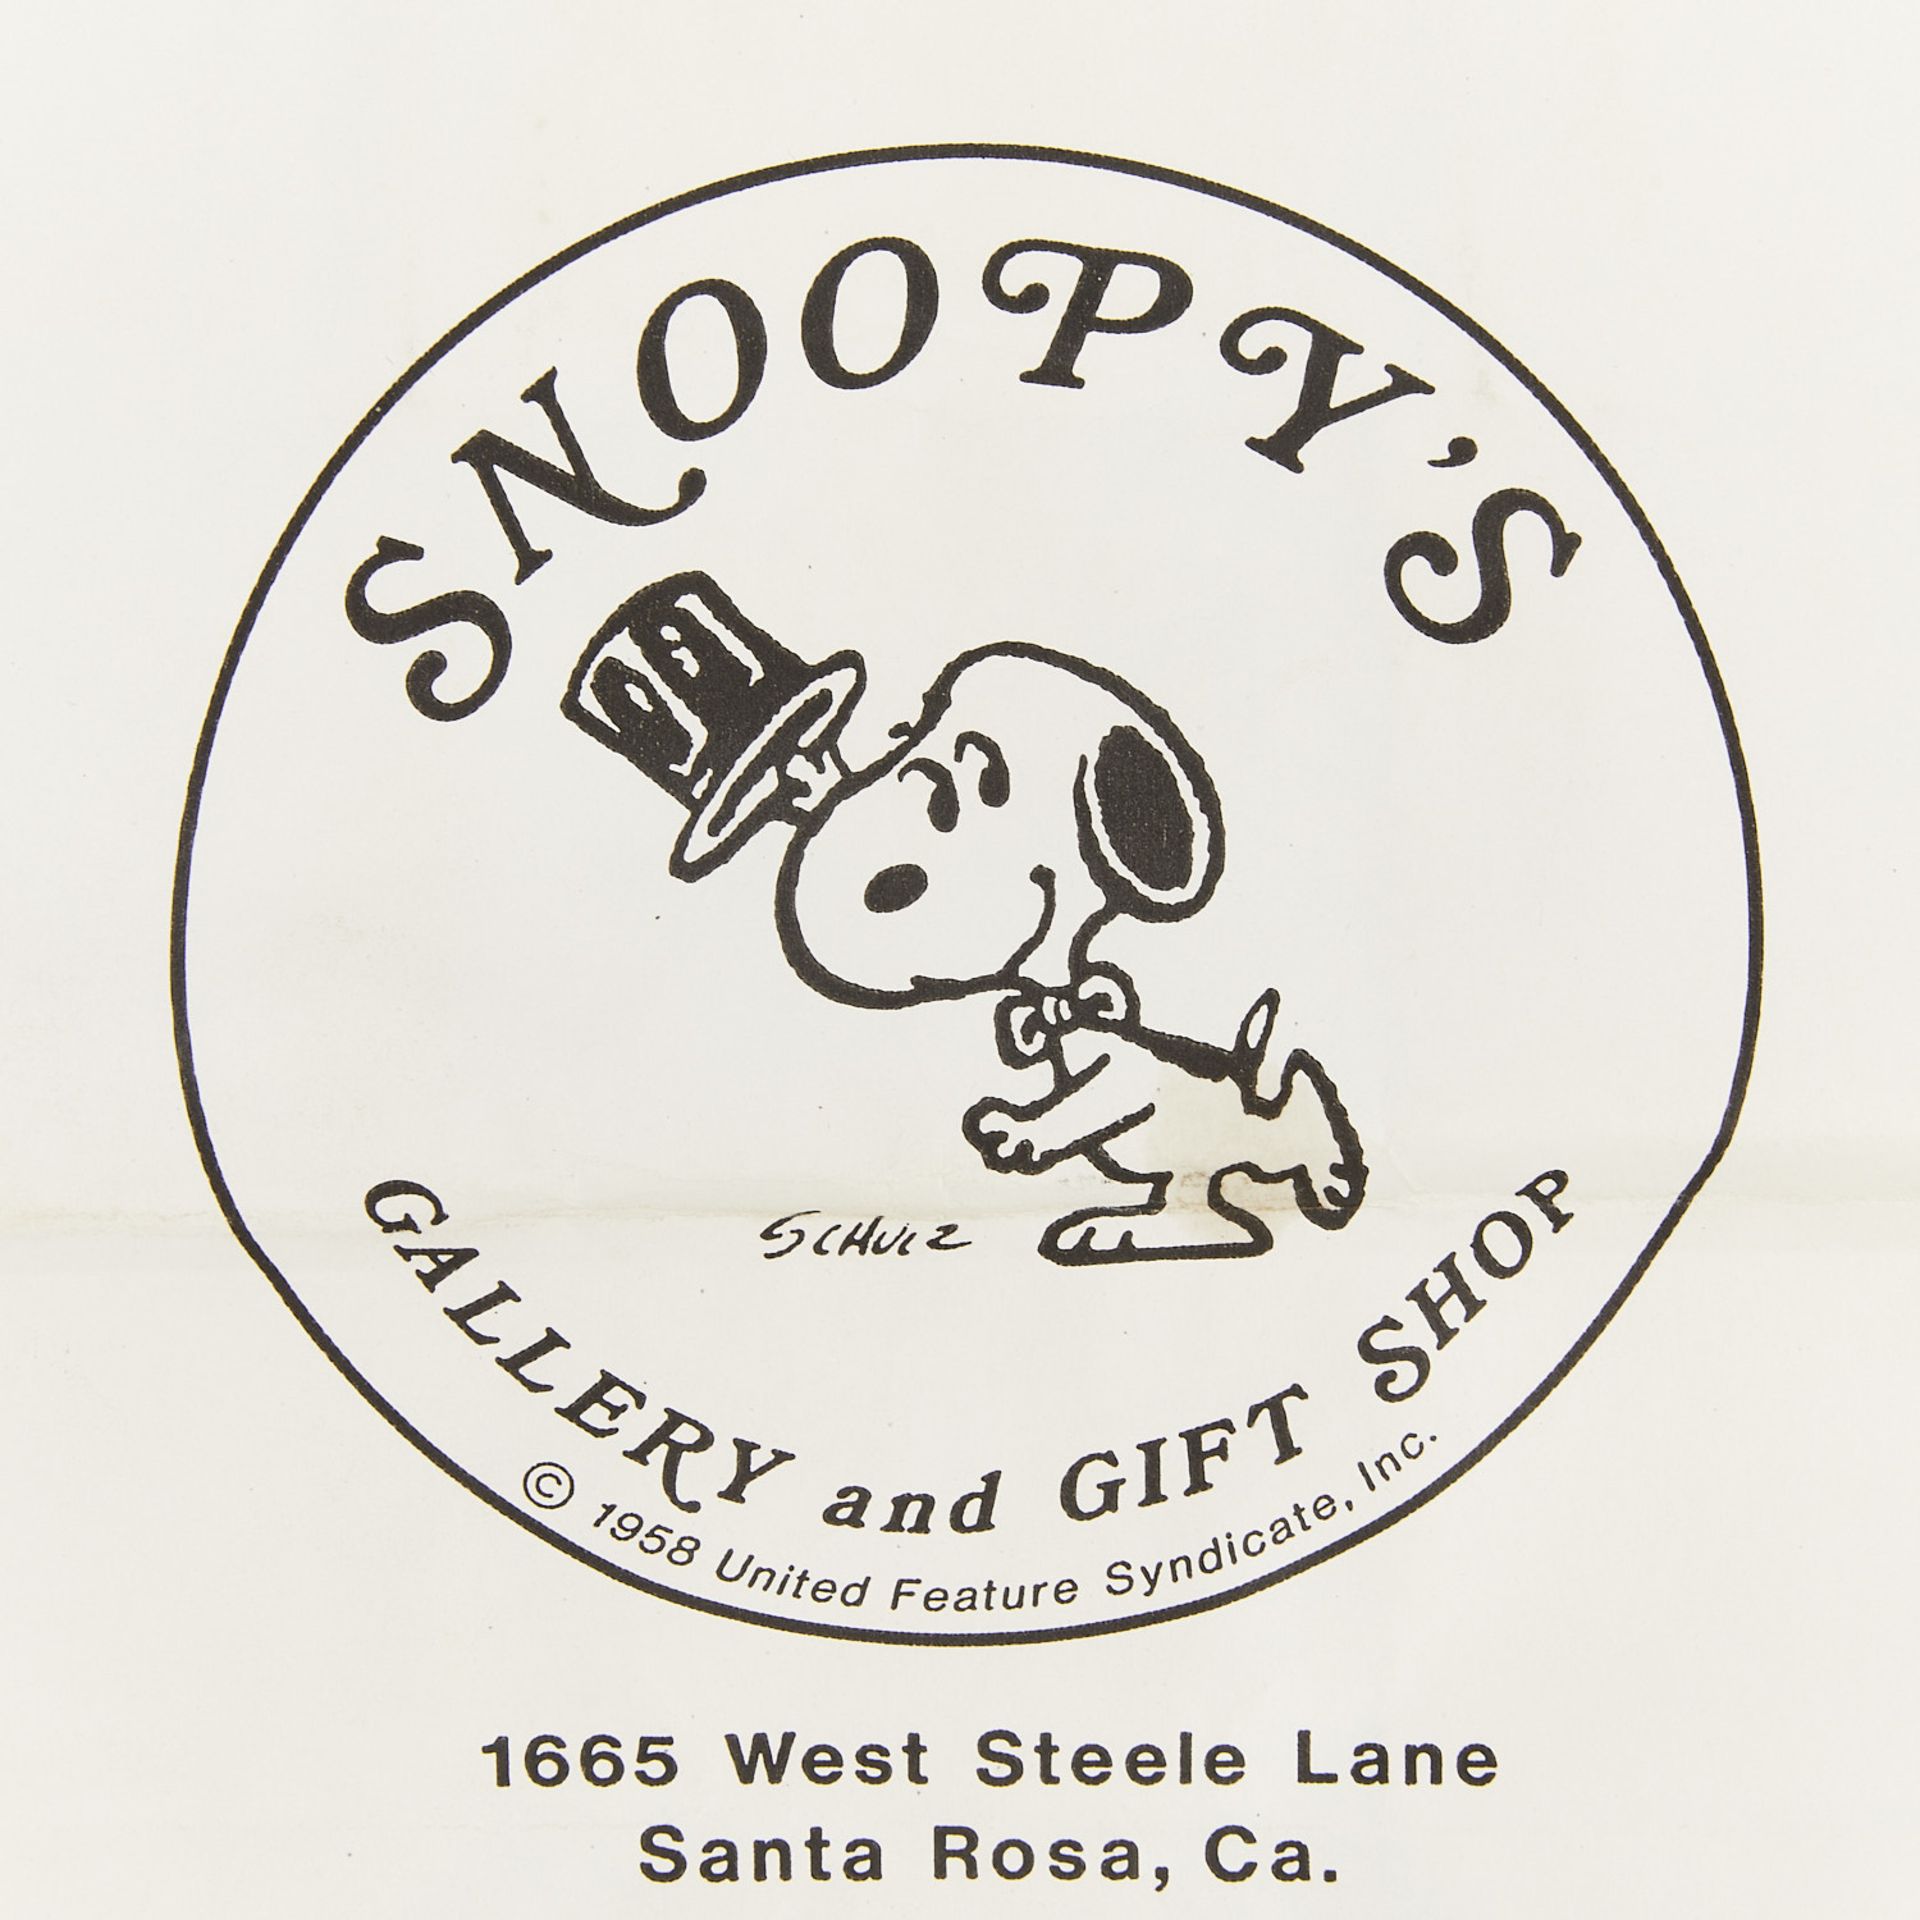 3 Vintage Camp Snoopy Gift Bags & Card - Image 5 of 8